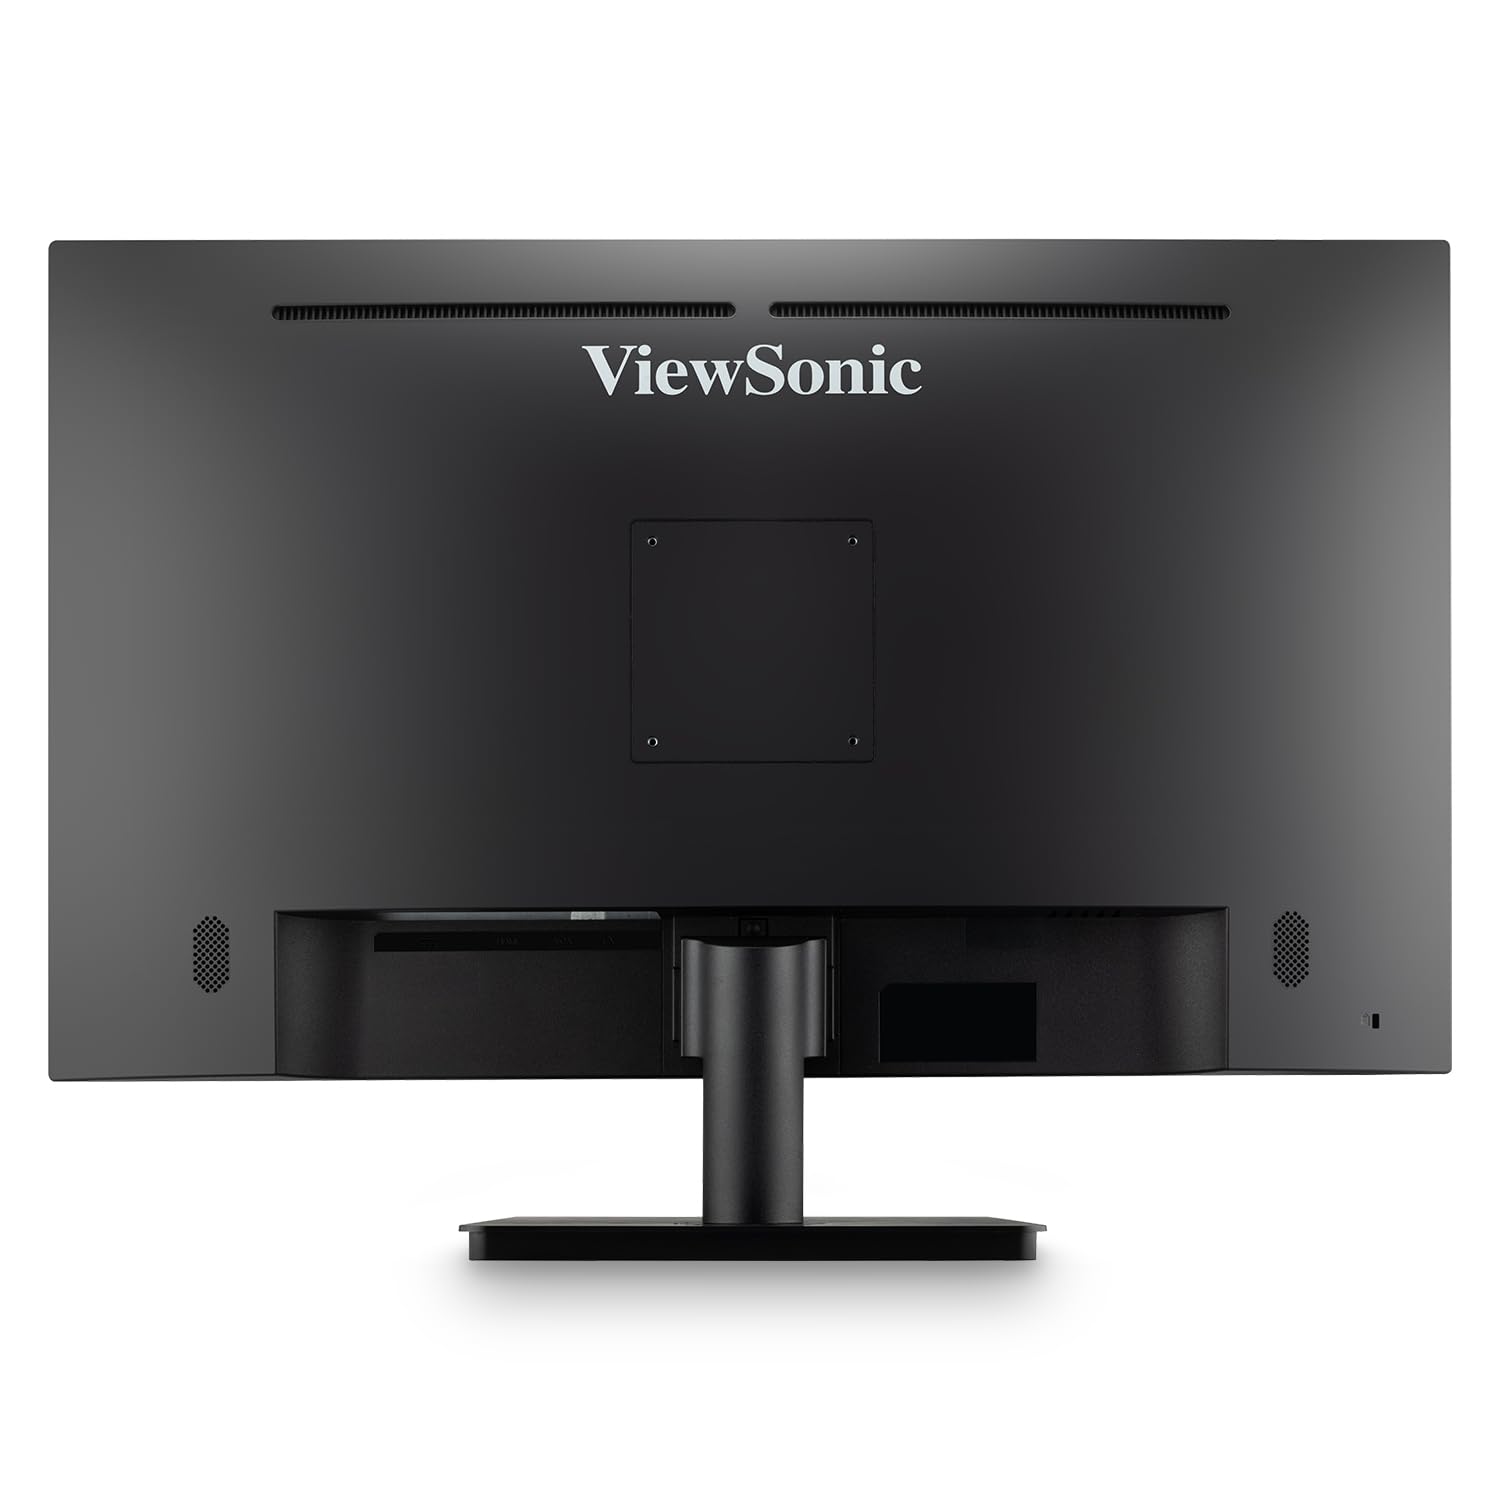 ViewSonic VA3209M 32 Inch IPS Full HD 1080p Monitor with Frameless Design, 75 Hz, Dual Speakers, HDMI, and VGA Inputs for Home and Office,Black